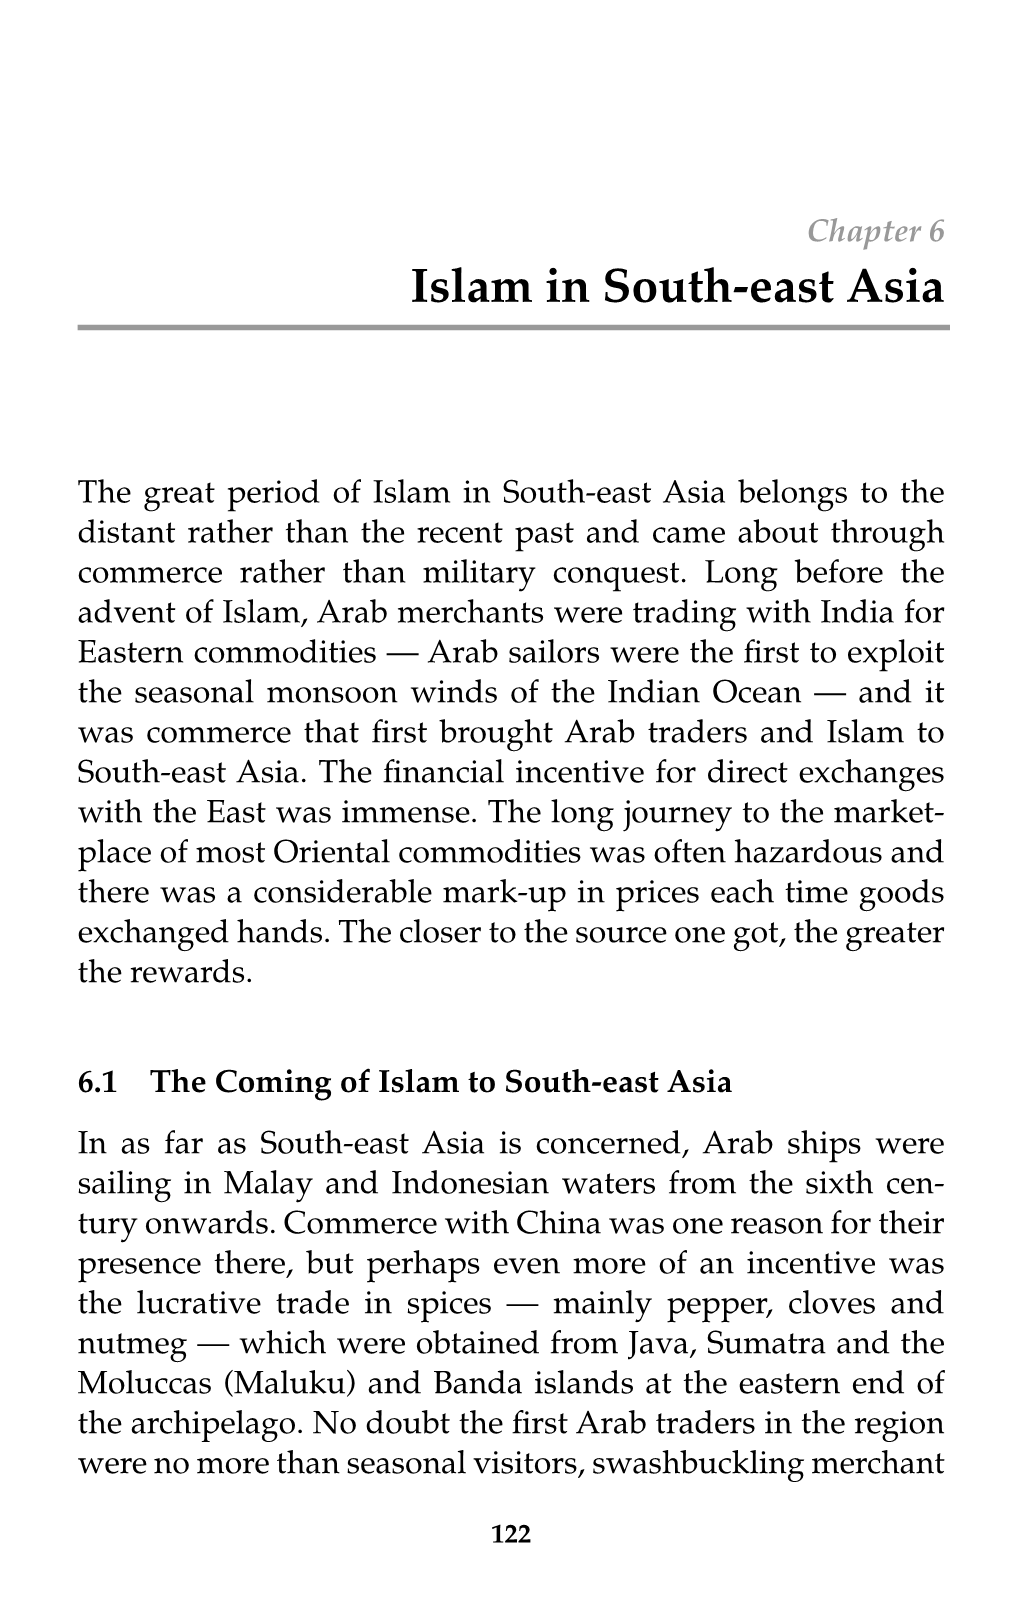 Islam in South-East Asia